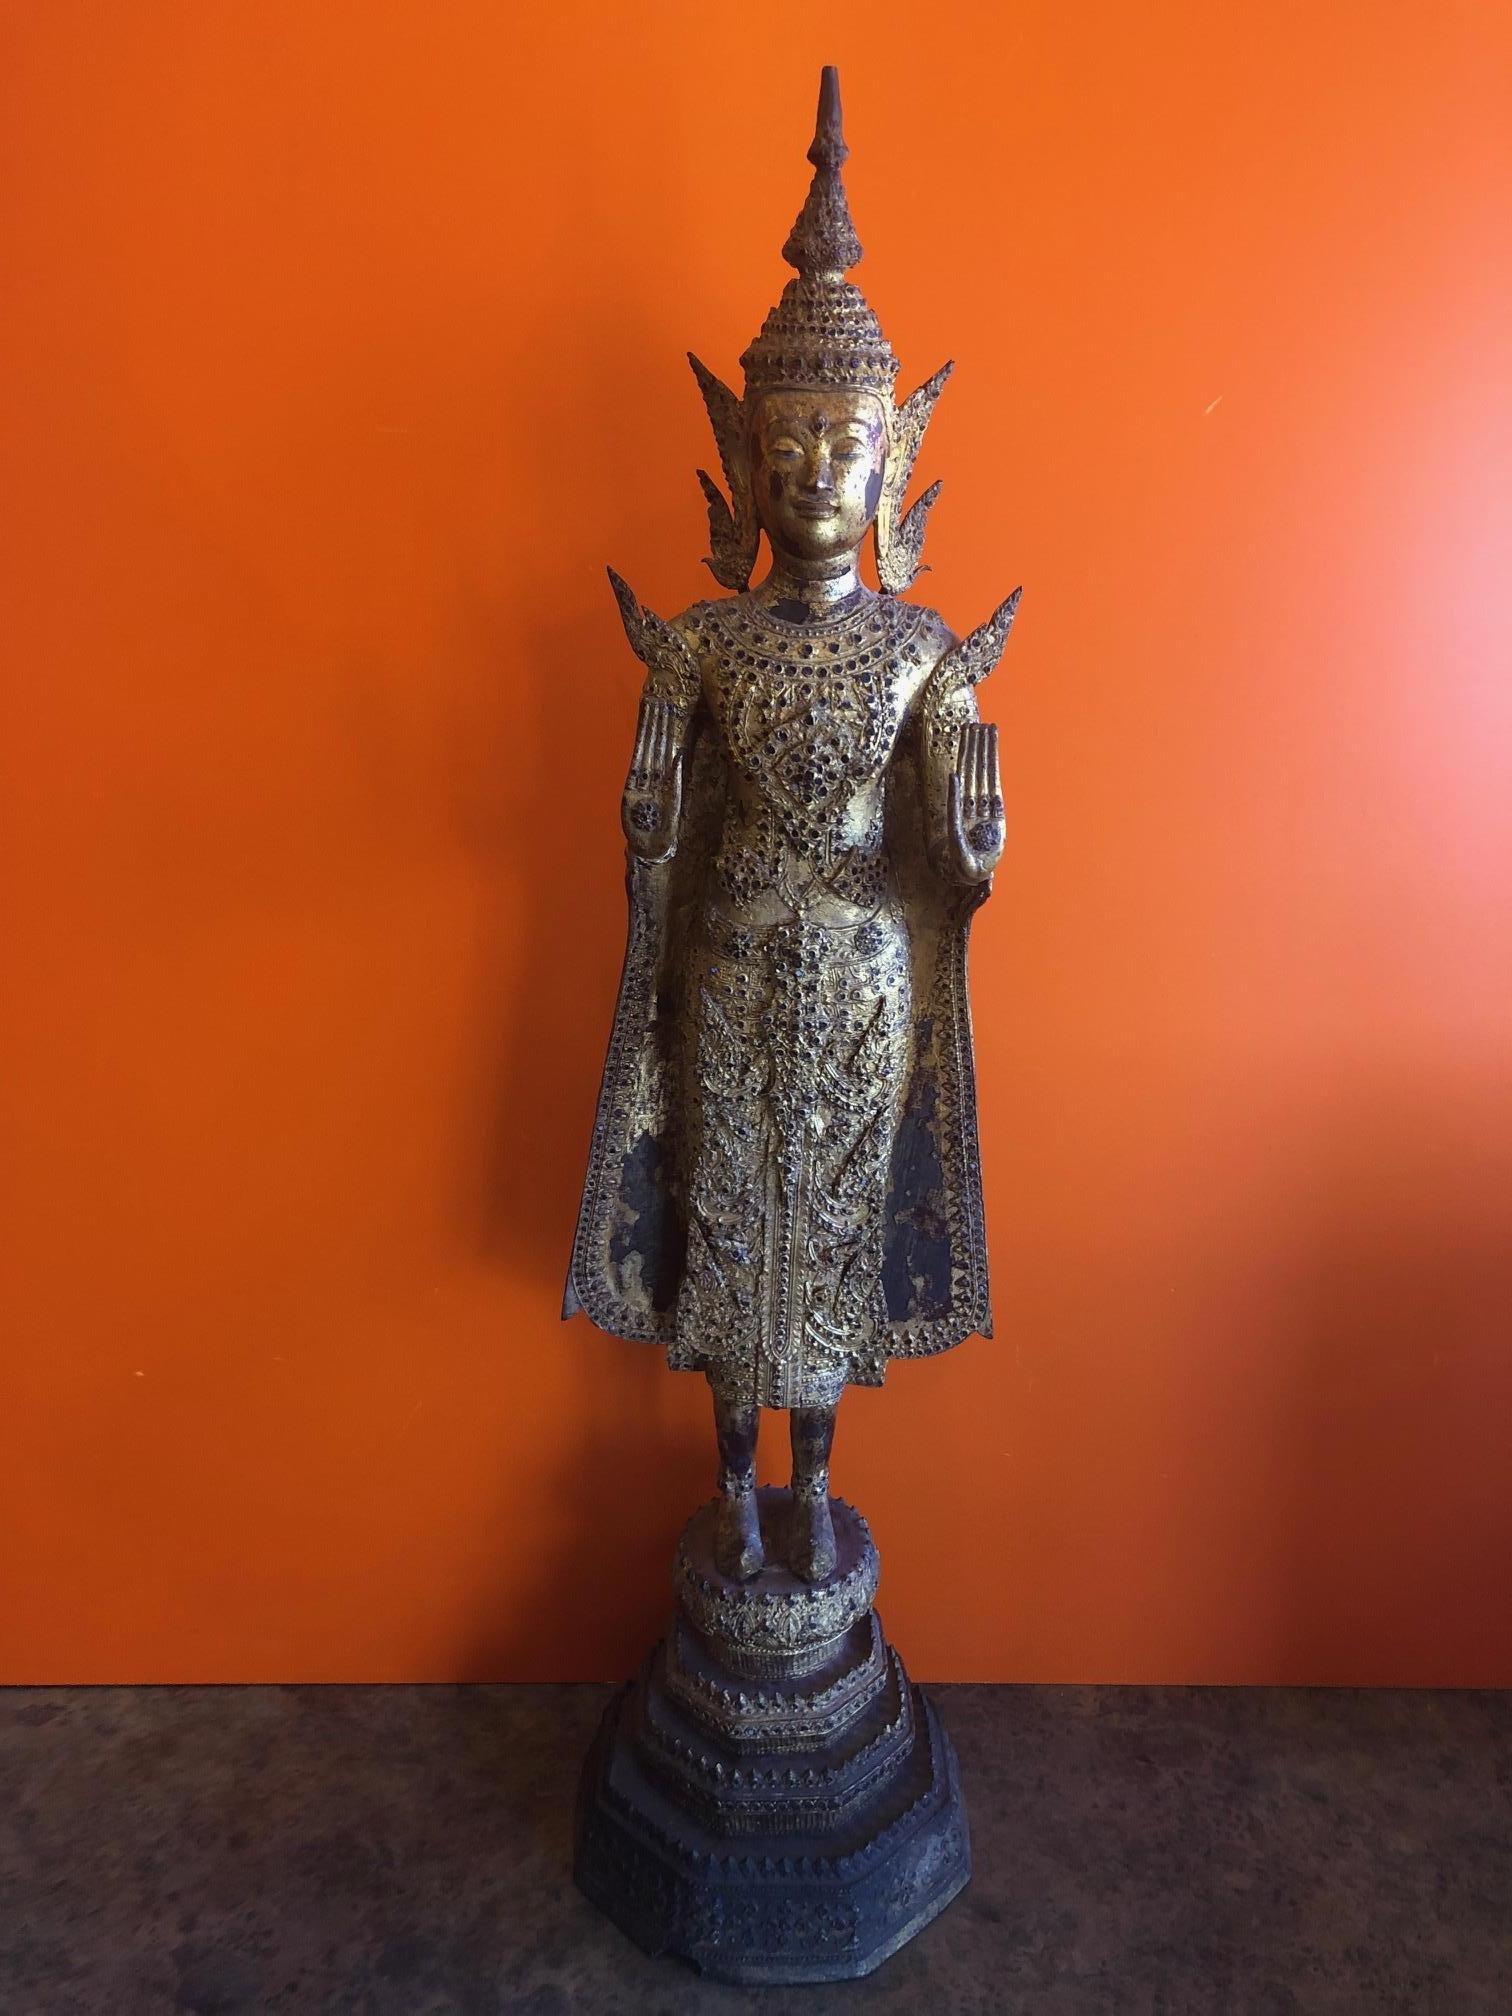 Antique Old Siam / Thai lacquered gilt bronze Ayuttaya Buddha, circa late 1800s. The piece is heavily gilded and richly ornamented with armbands, bracelets and anklets. The Buddha’s austere countenance seems to smolder and glow, highlighting the